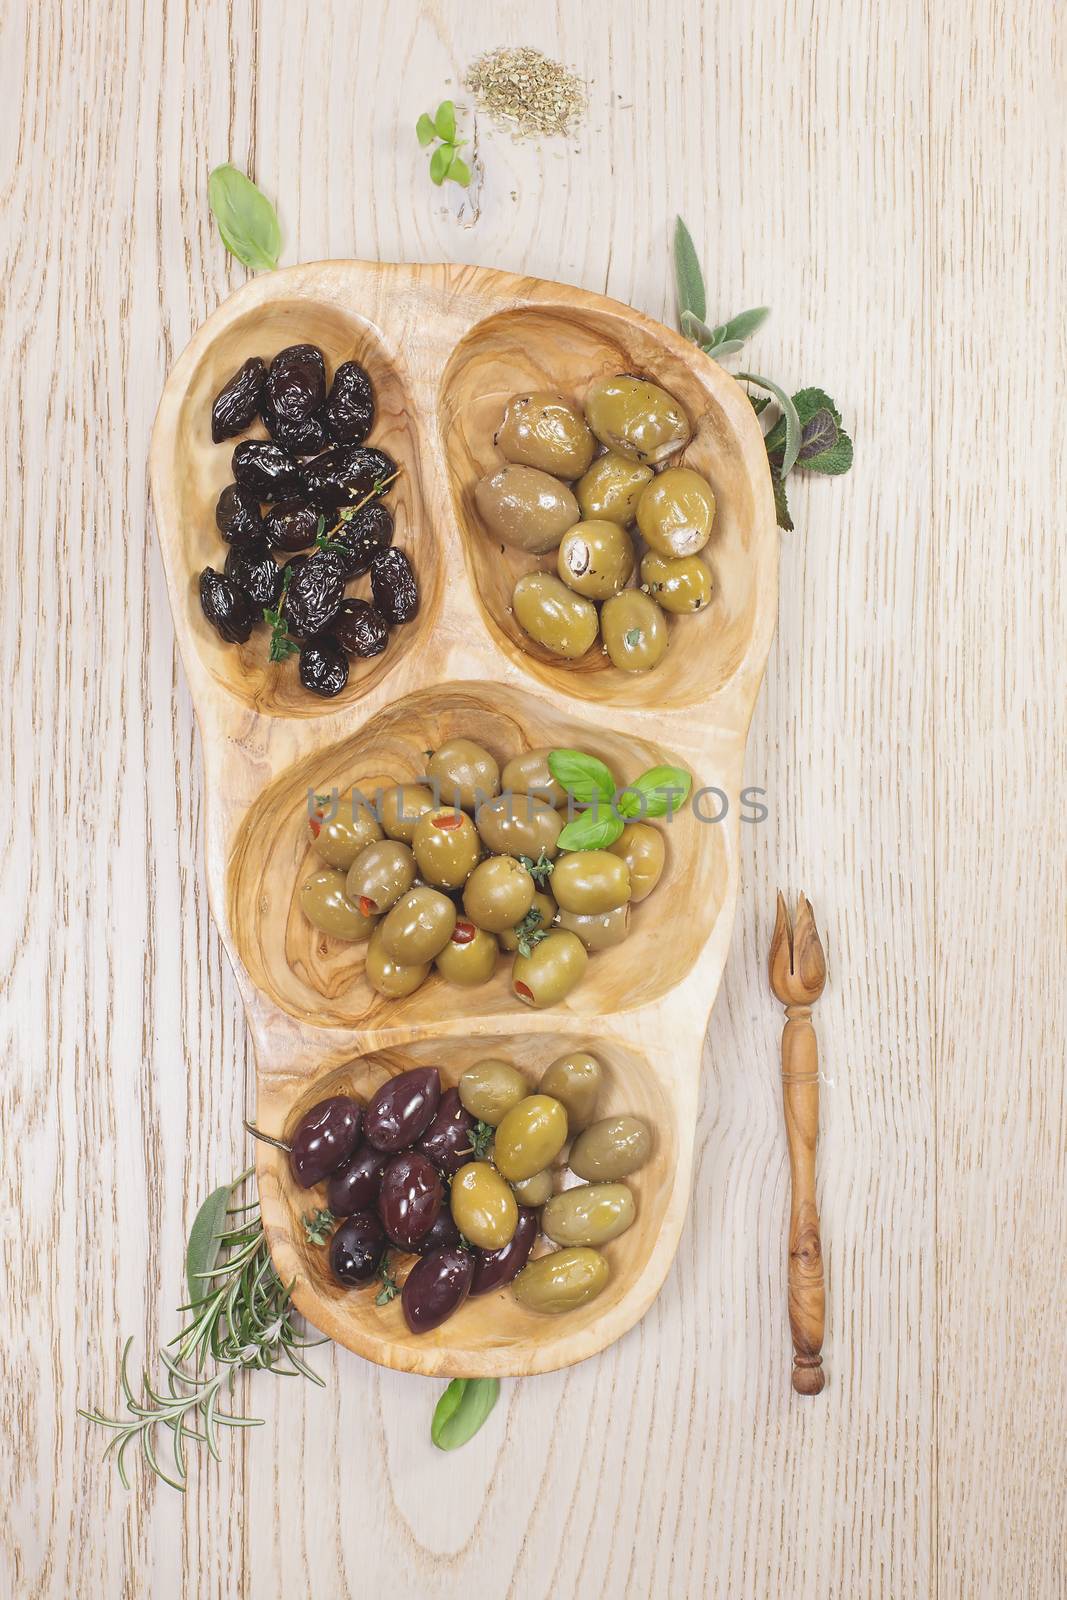 Assorted types of olives by Slast20